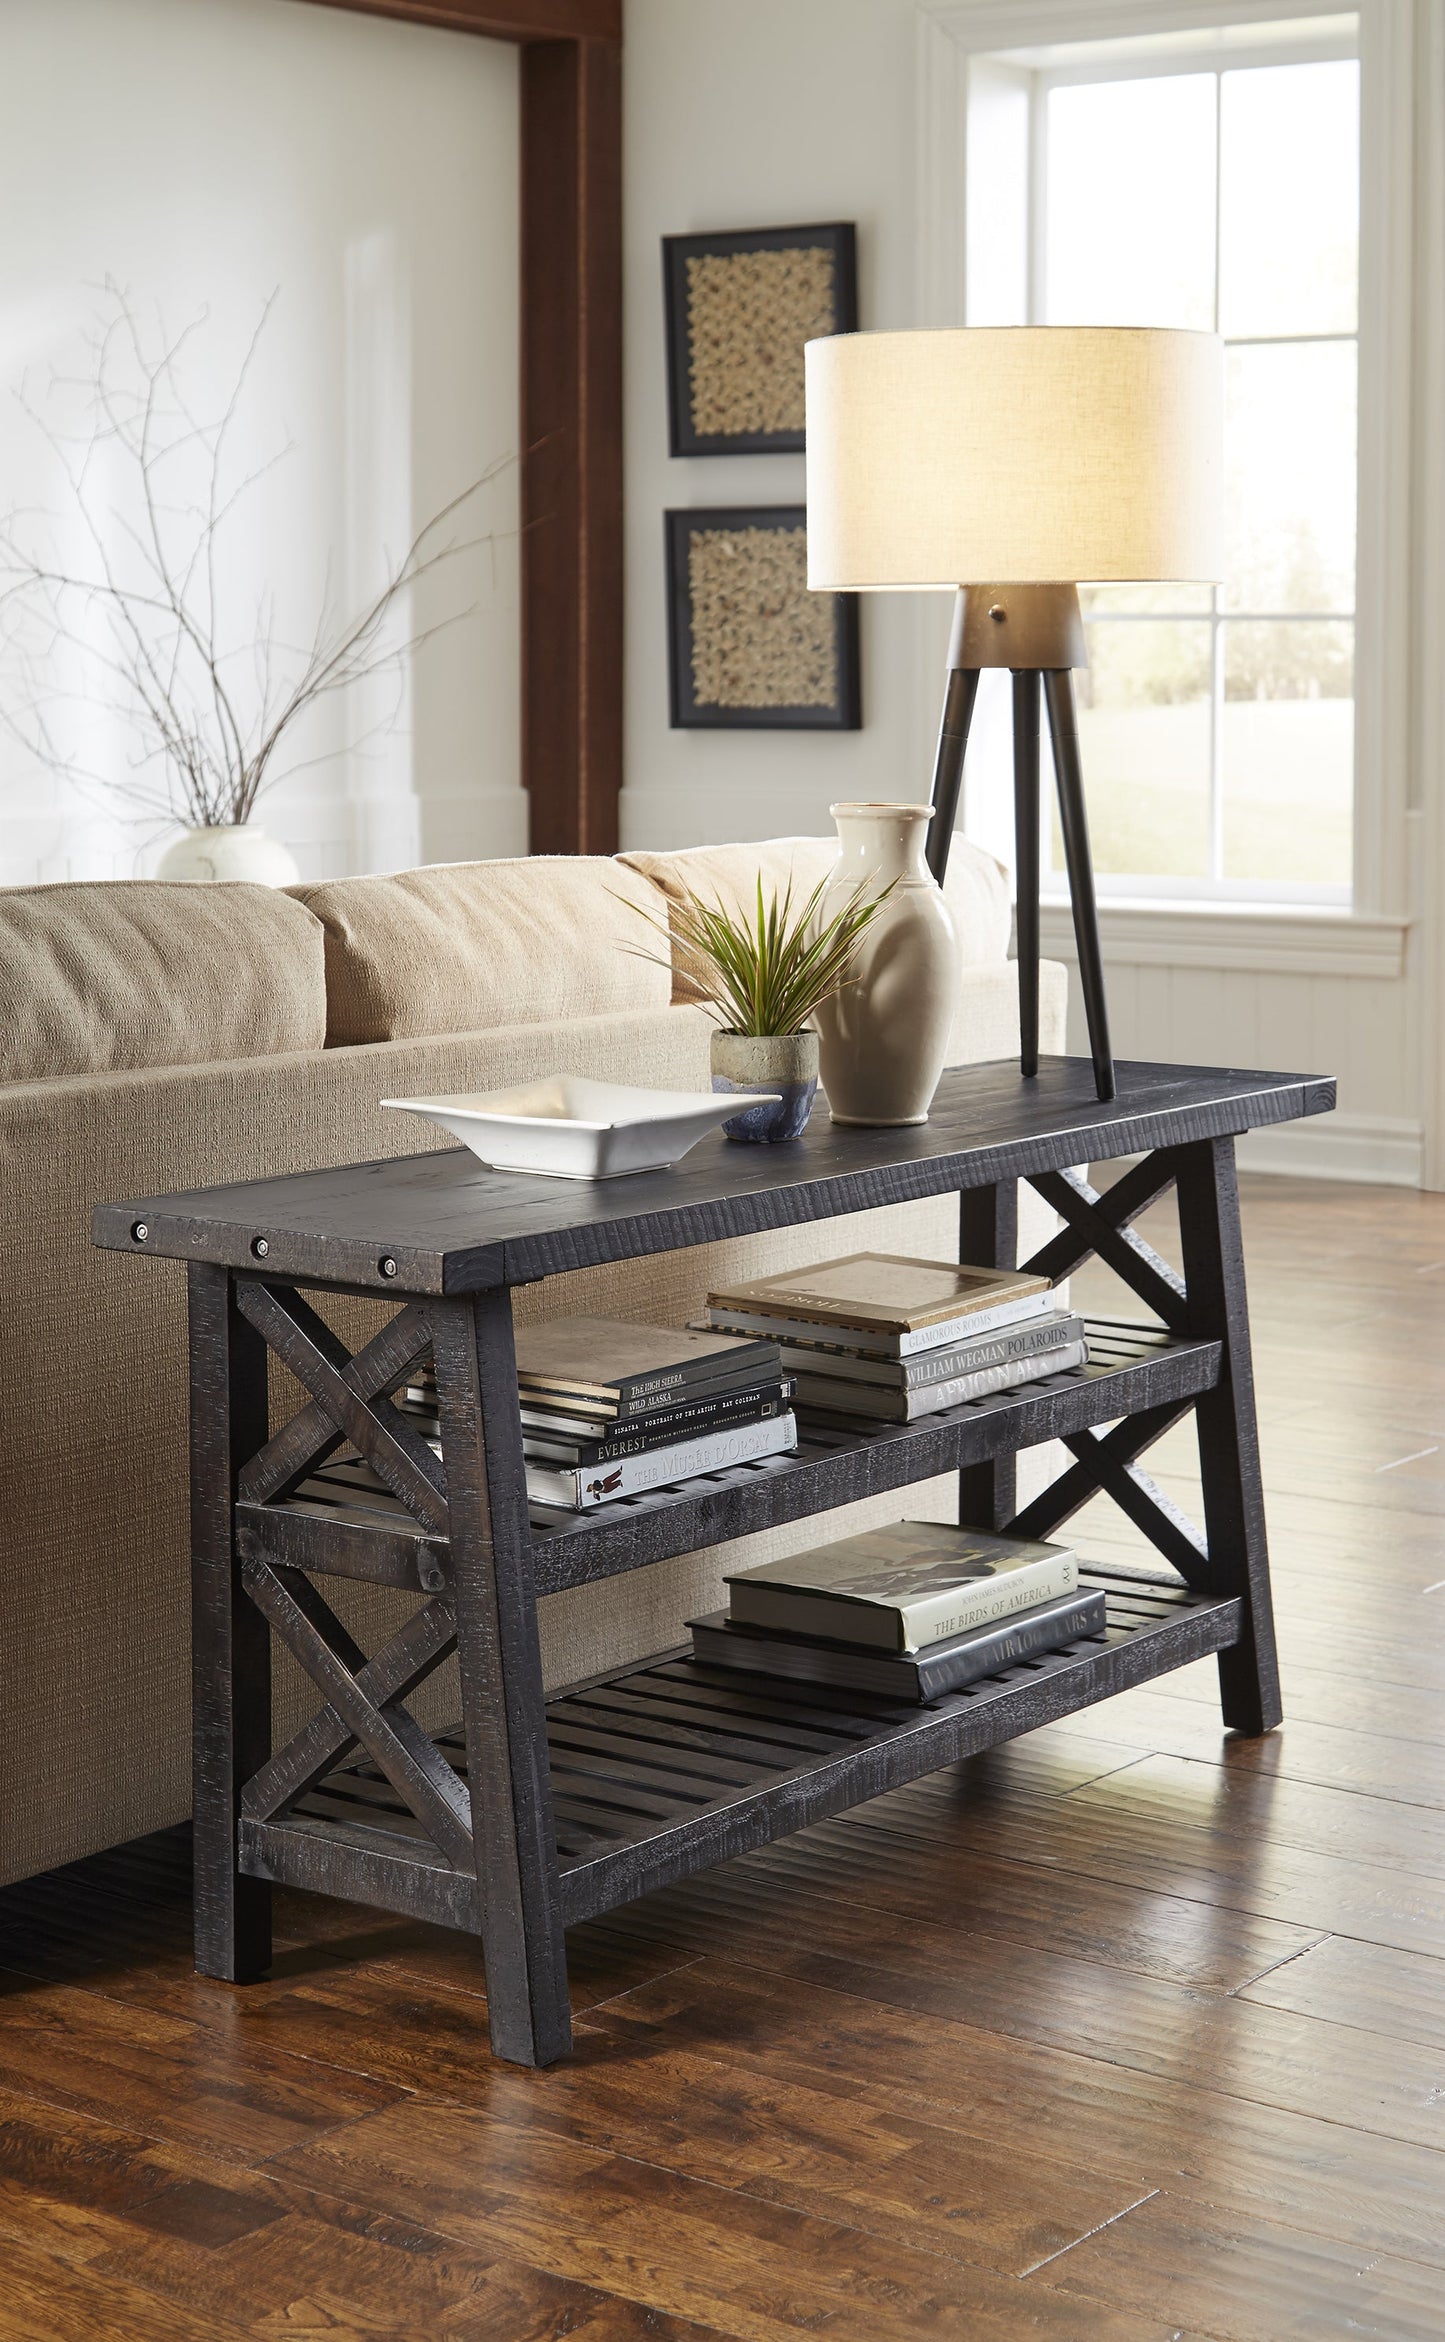 Modus Yosemite Console Table in Cafe